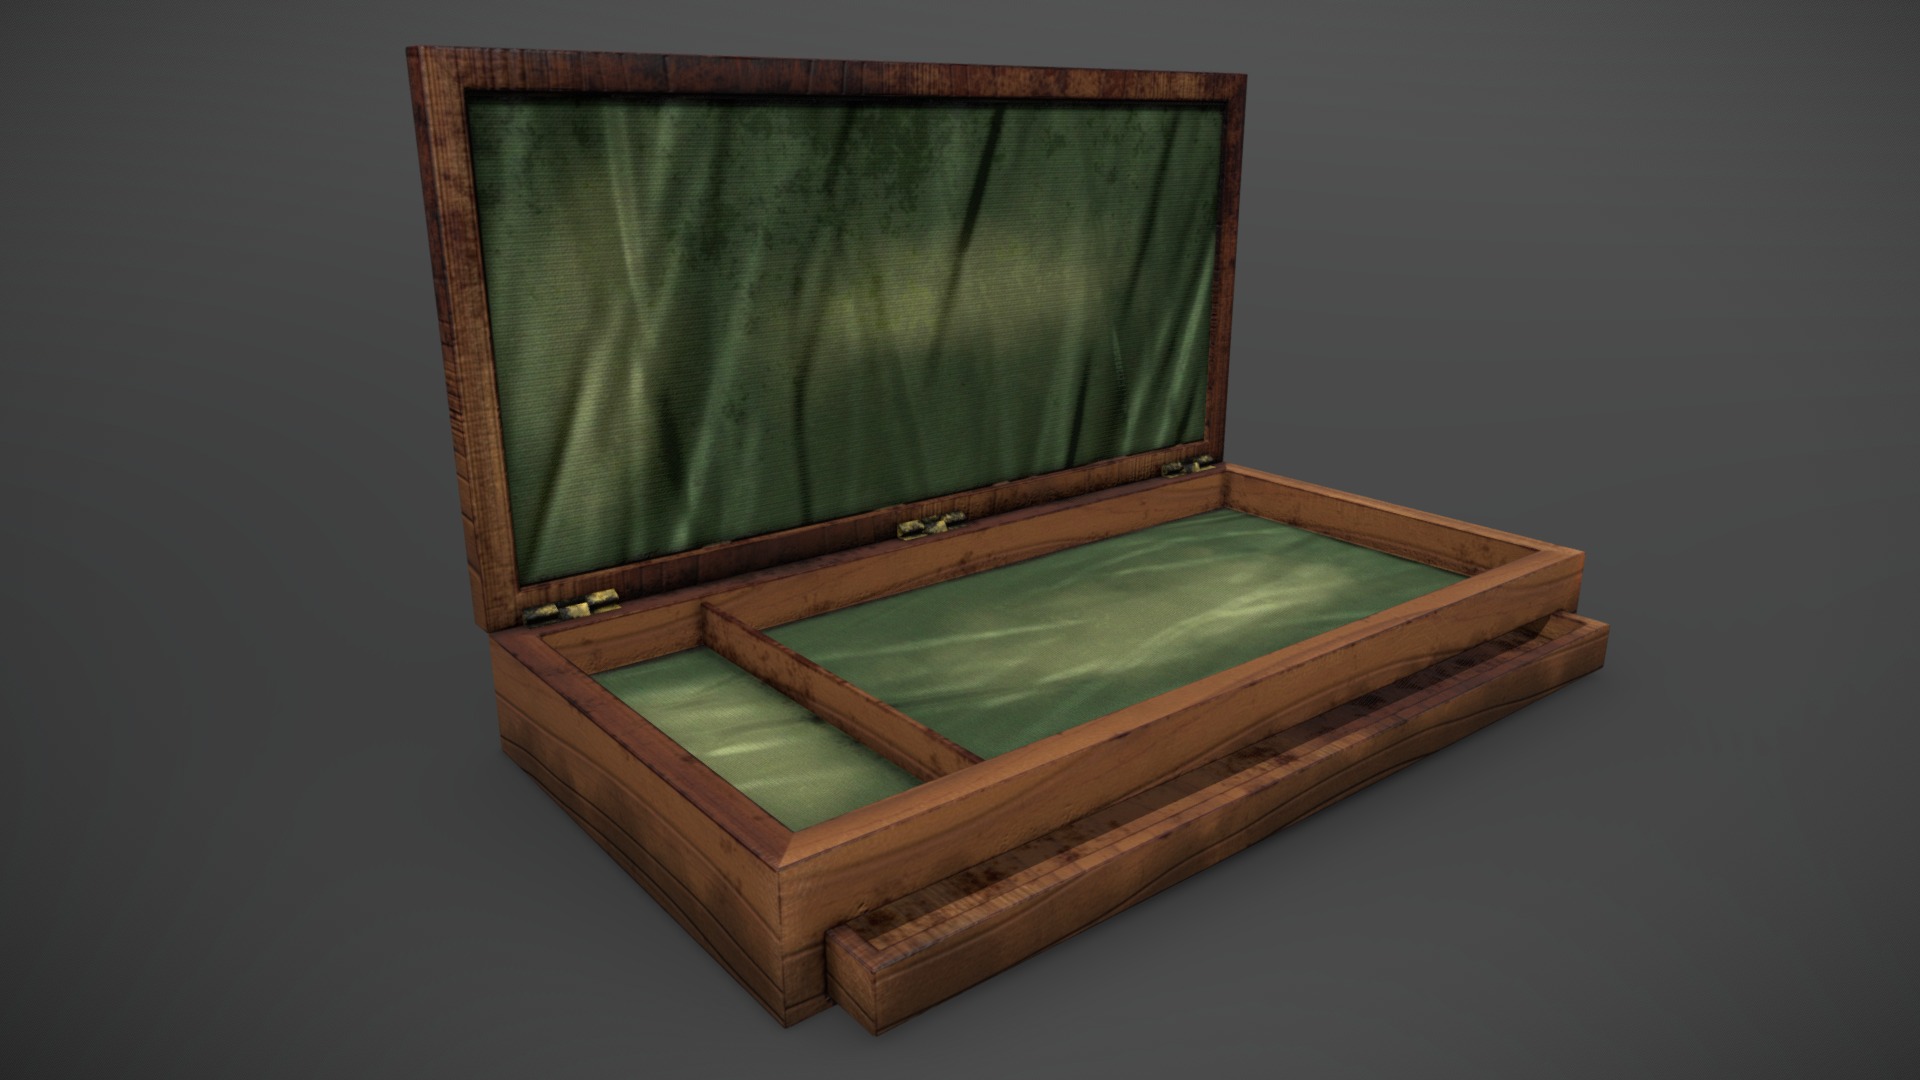 3D model Old Medical Box - This is a 3D model of the Old Medical Box. The 3D model is about a wooden box with a green screen.